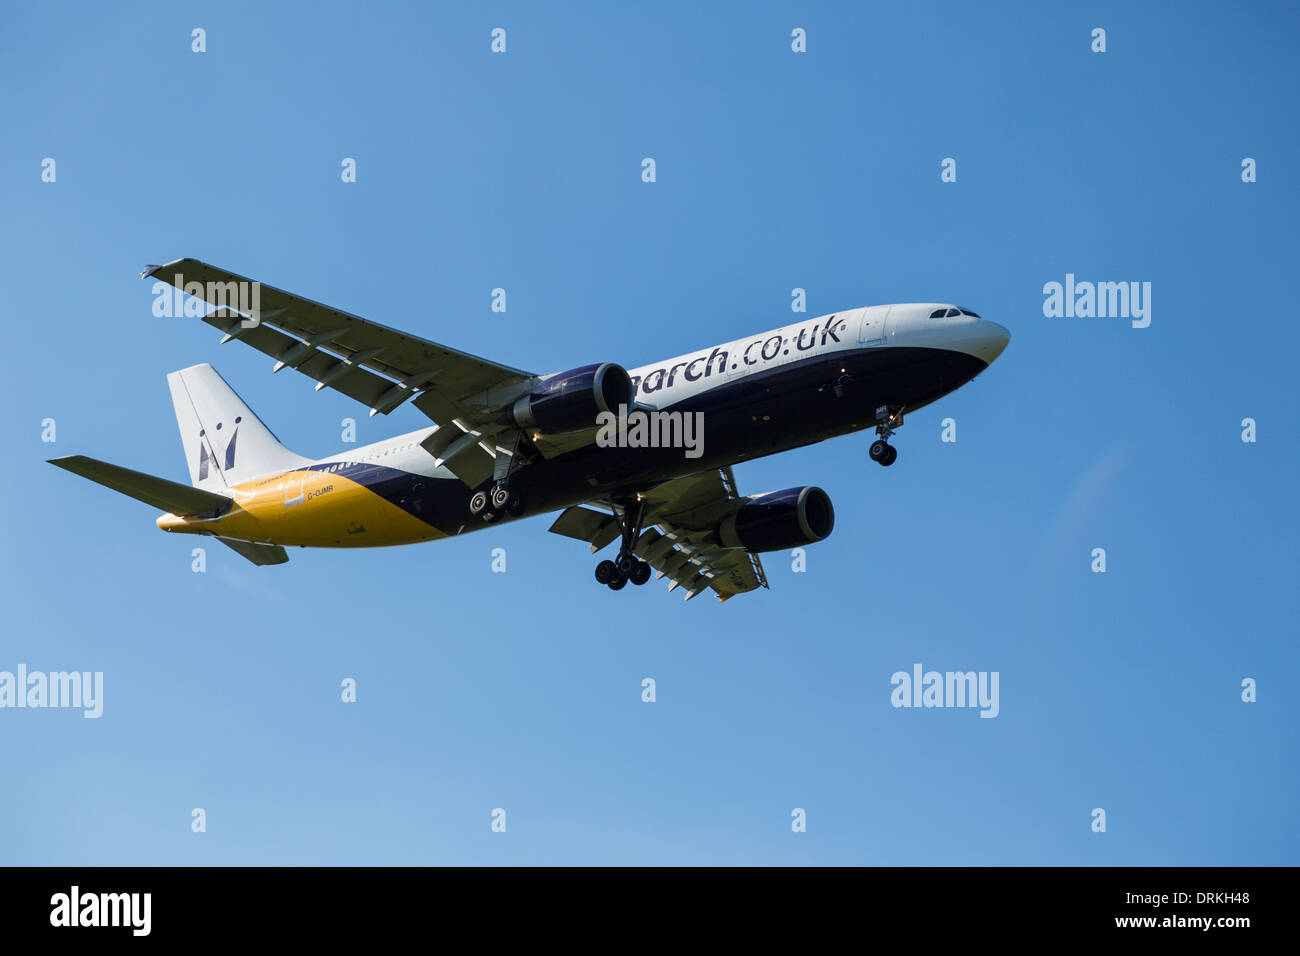 Monarch airbus A300 to land Stock Photo